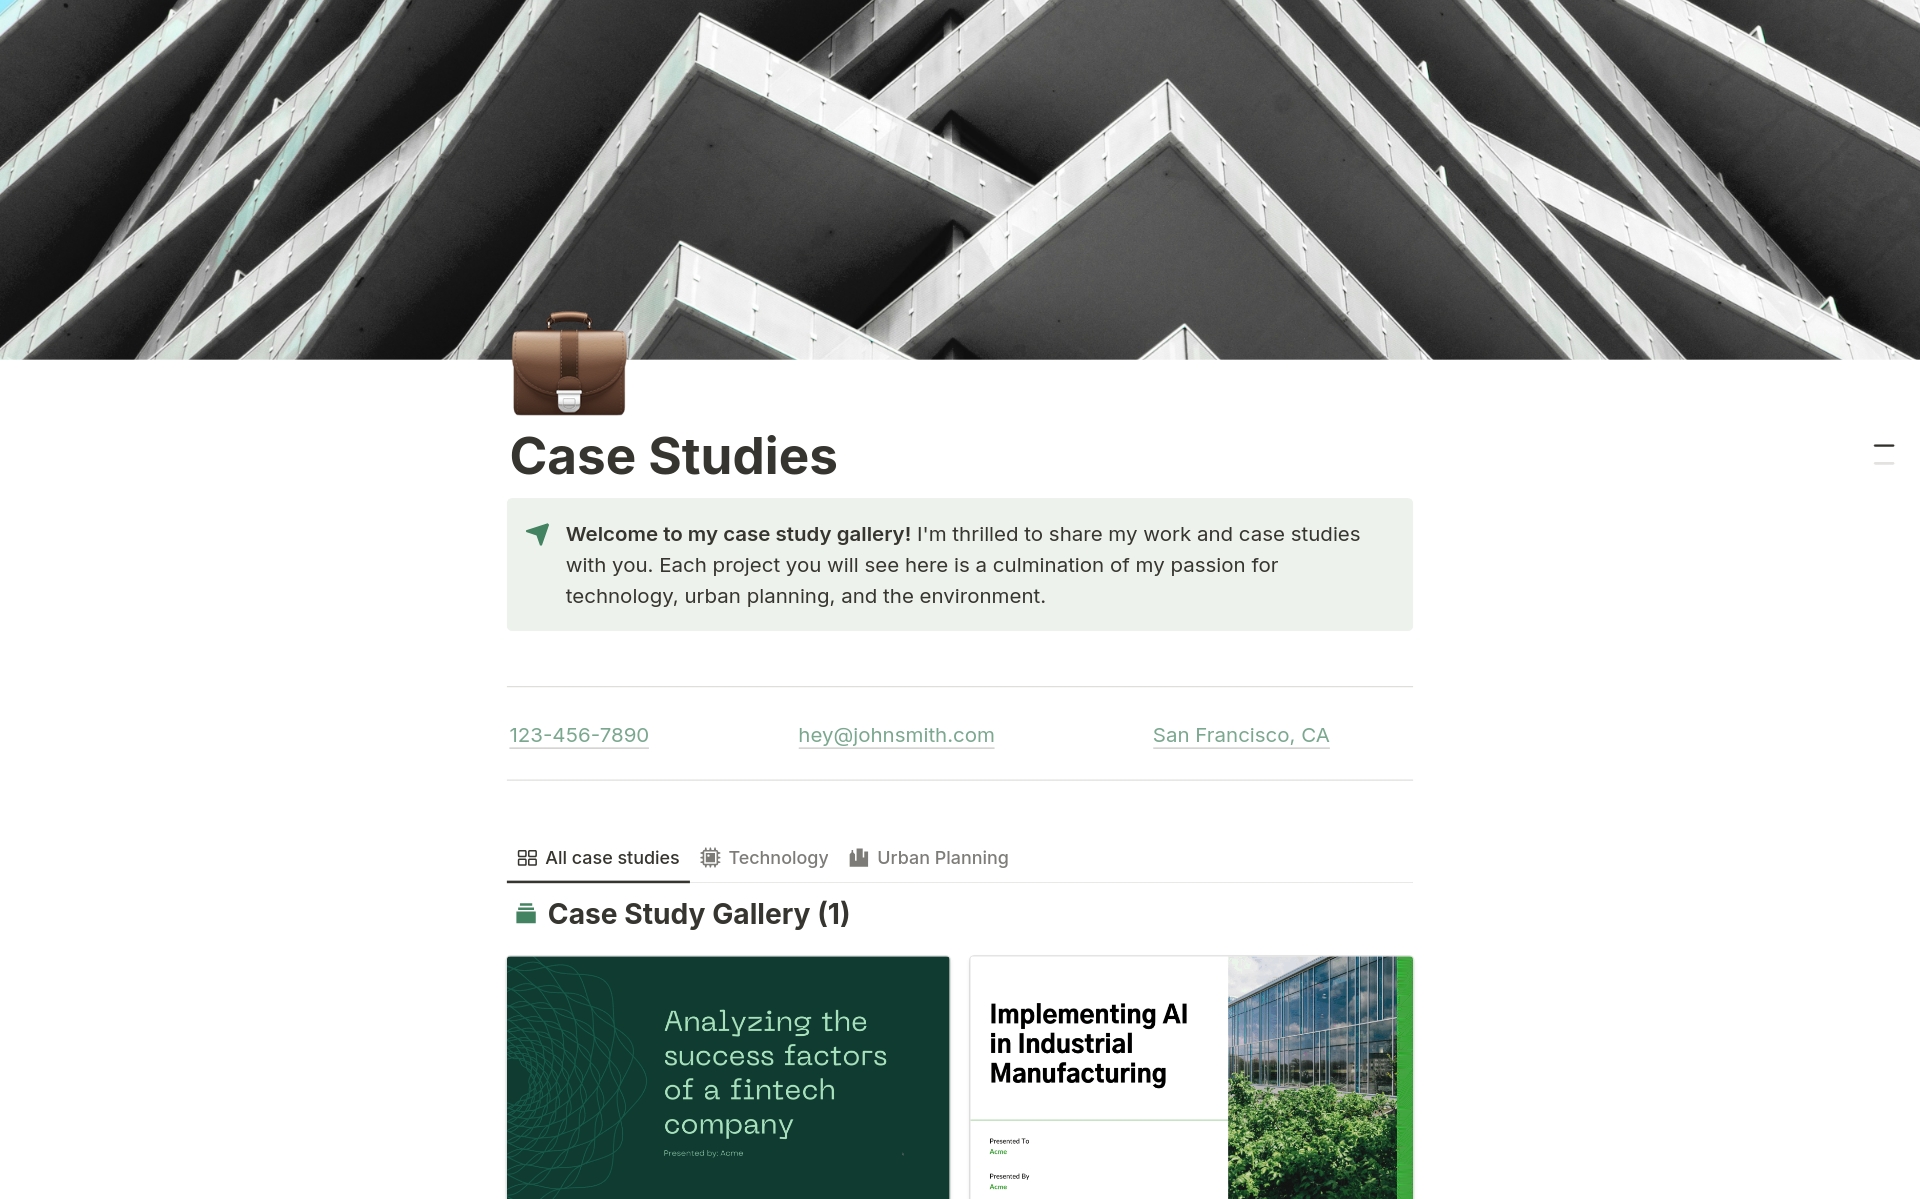 Designed for seamless organization and presentation, this template is perfect for showcasing your case studies and insights in a captivating and user-friendly format.